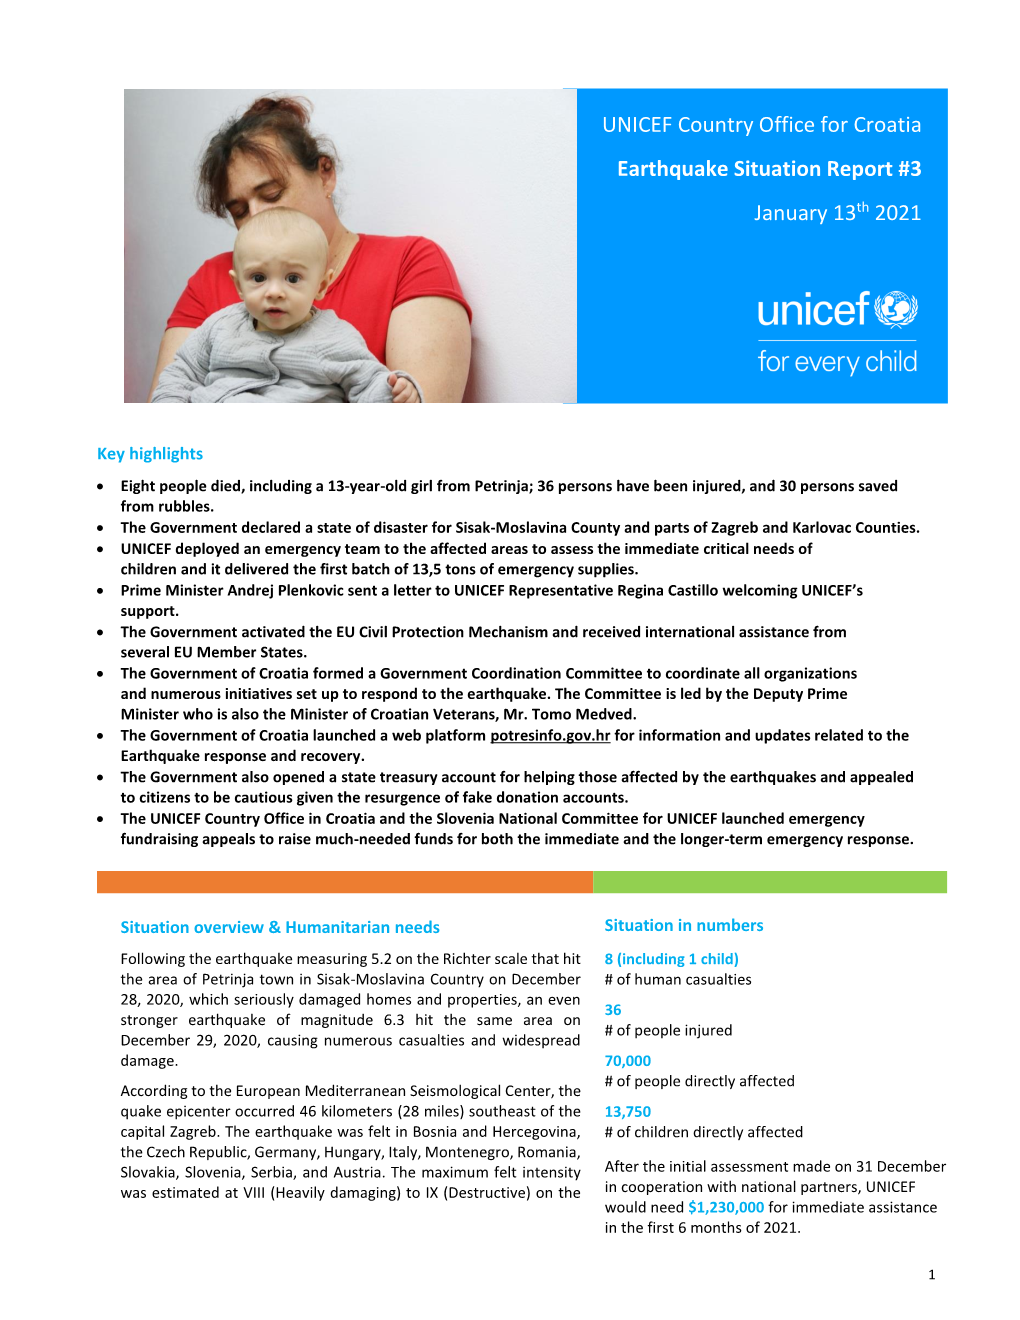 UNICEF Country Office for Croatia Earthquake Situation Report #3 January 13Th 2021